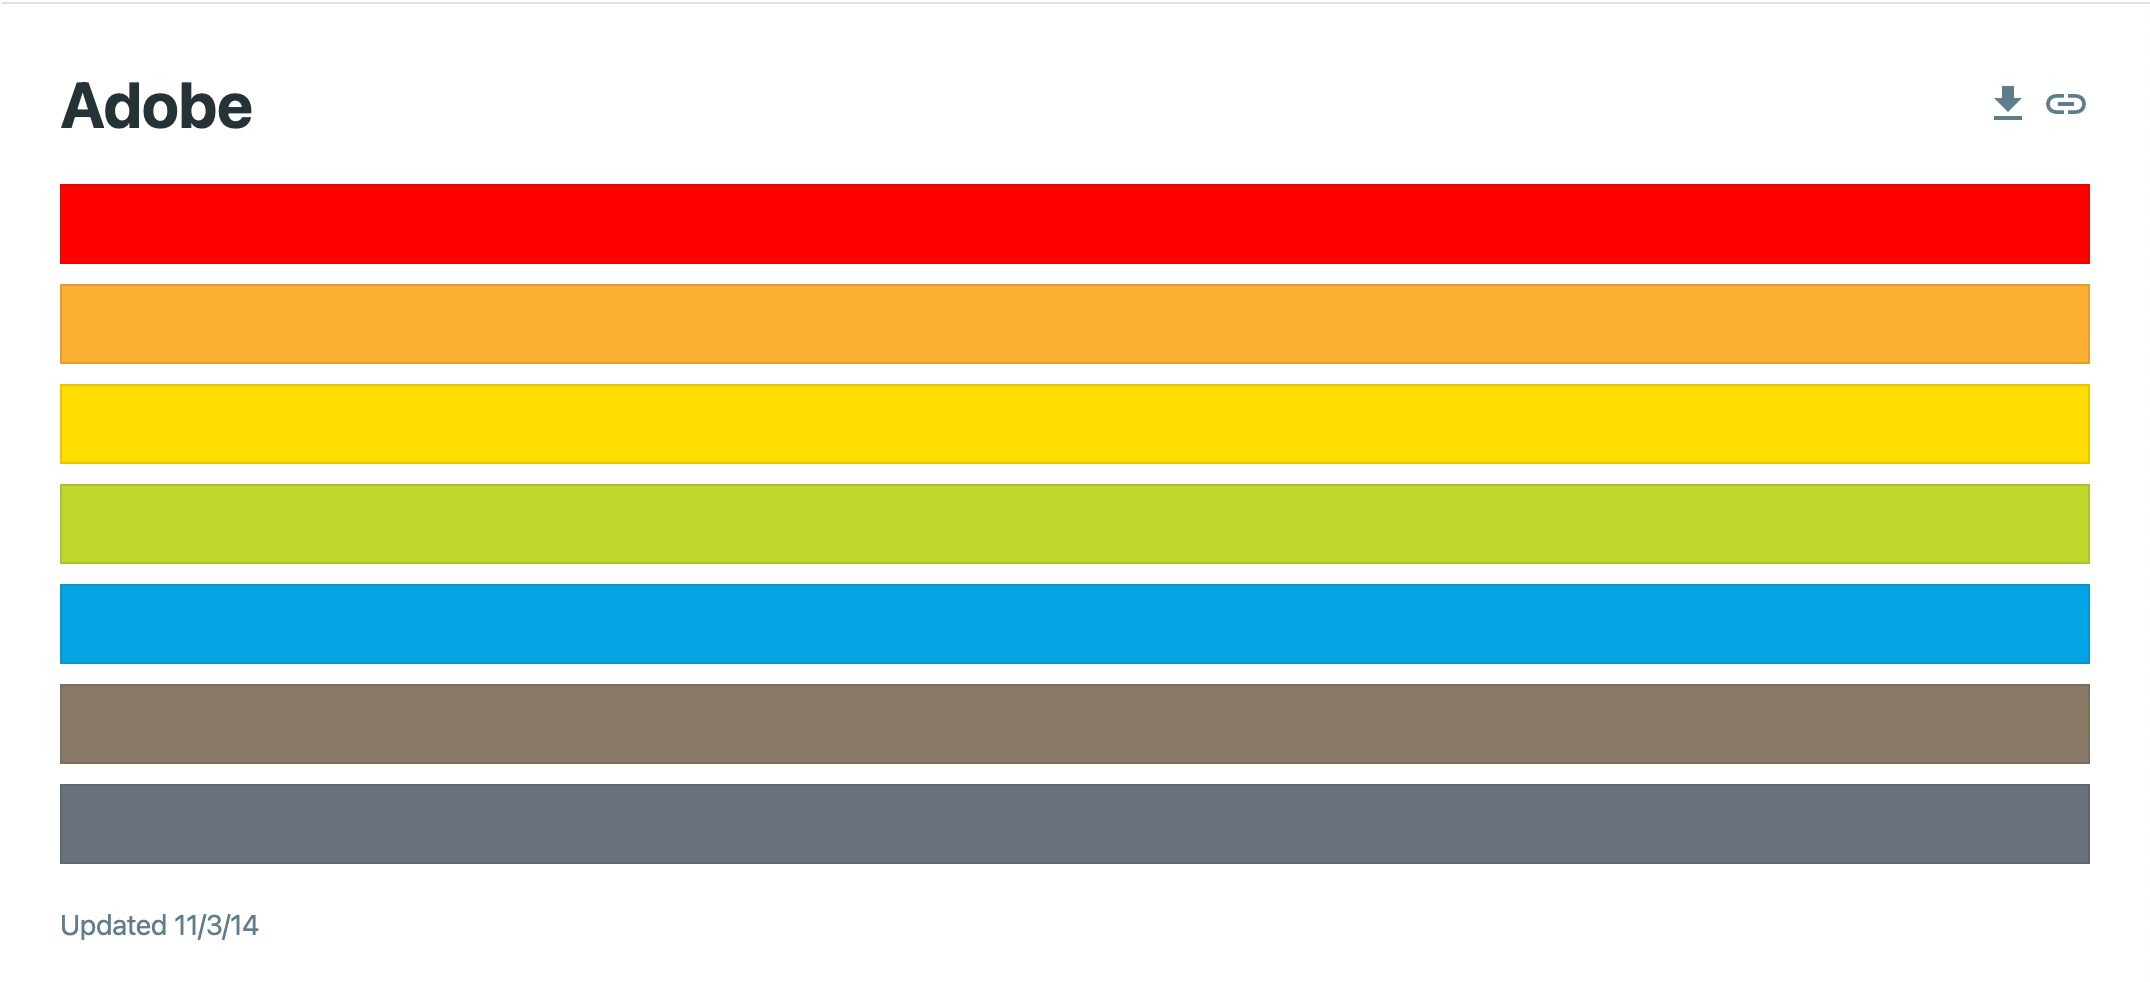 Adobe's brand colors (red, orange, yellow, light green, and grey)